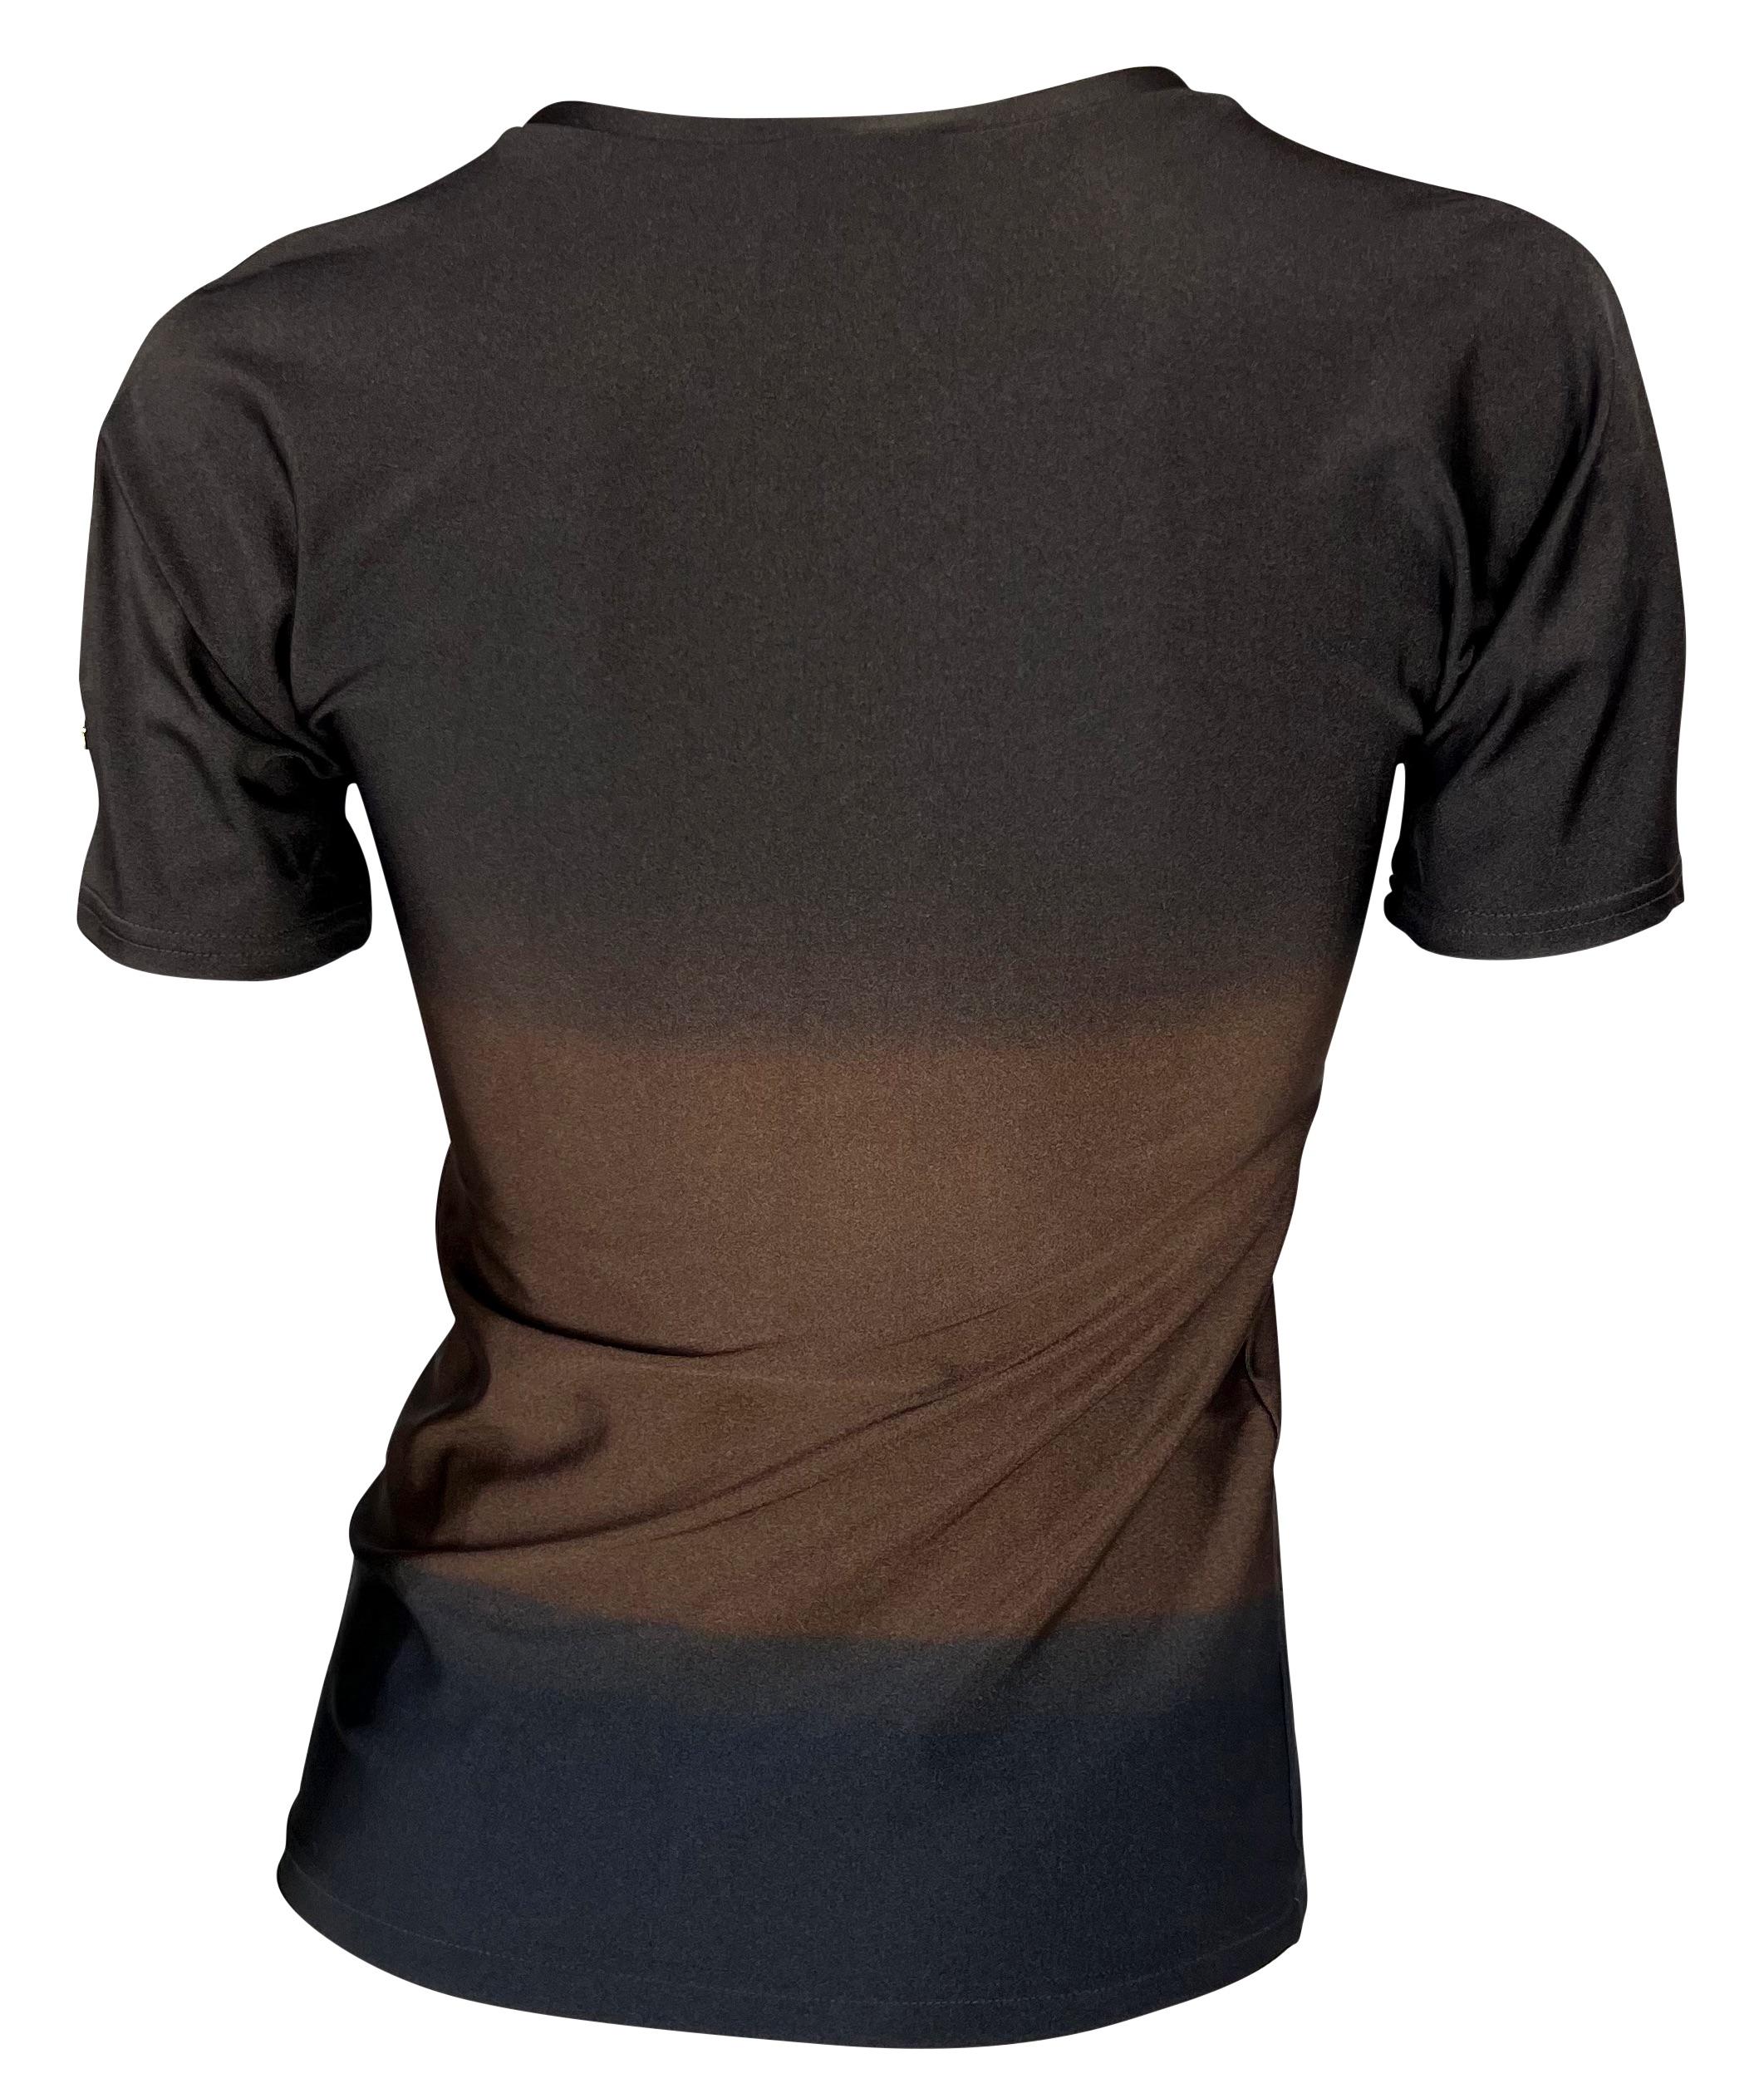 S/S 1997 Gucci by Tom Ford 'G' Medallion Brown Navy Ombré Stretch Swim Top For Sale 1